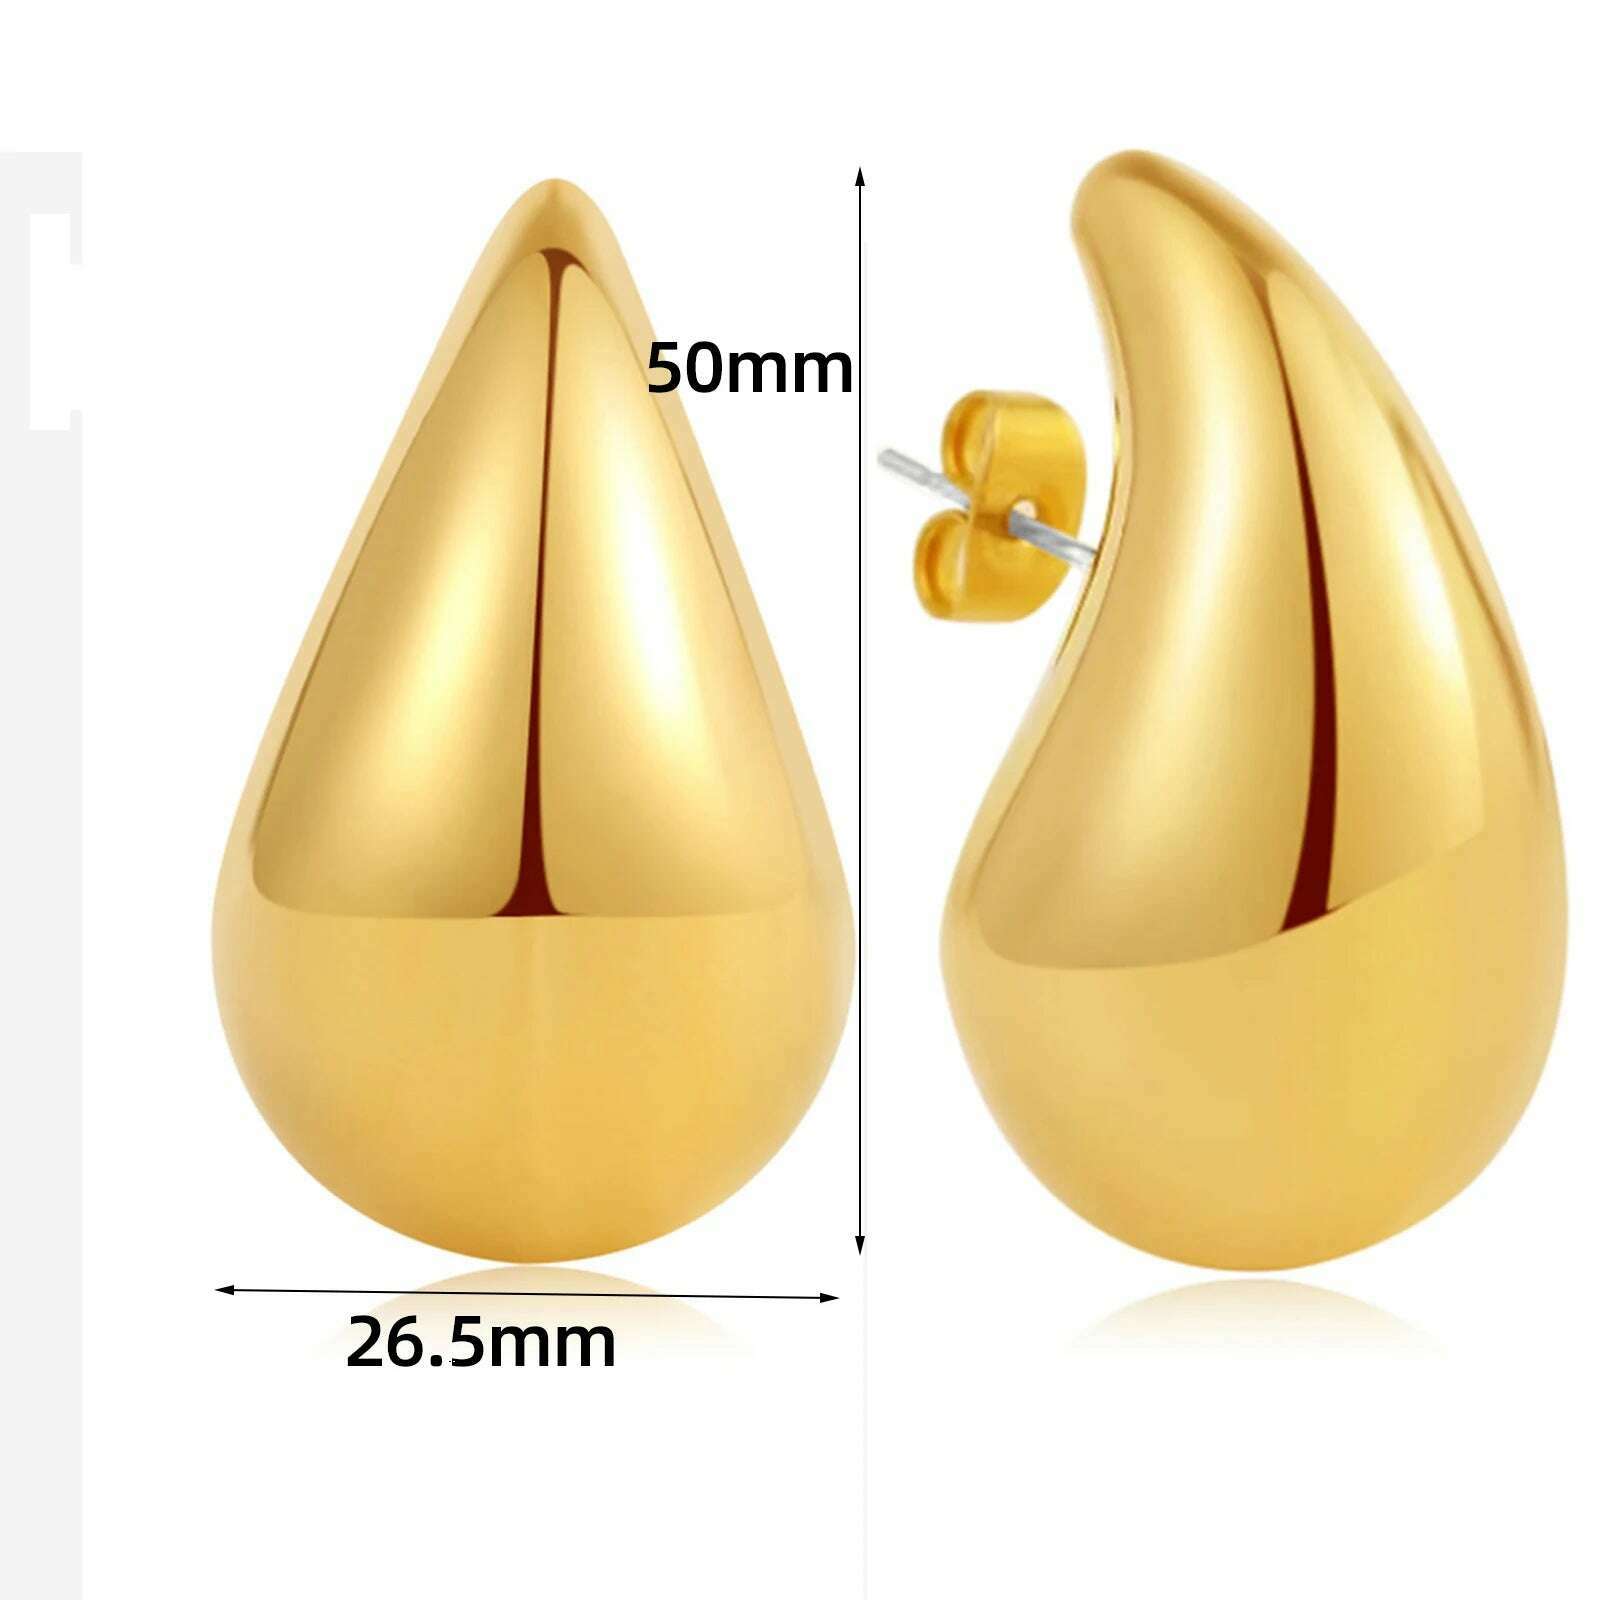 KIMLUD, Exaggerate 50mm Big Water Drop 18K Gold Plated Metal Oversize Dupes Thick Drop Earrings Lightweight Stainless Steel Jewelry New, KIMLUD Womens Clothes